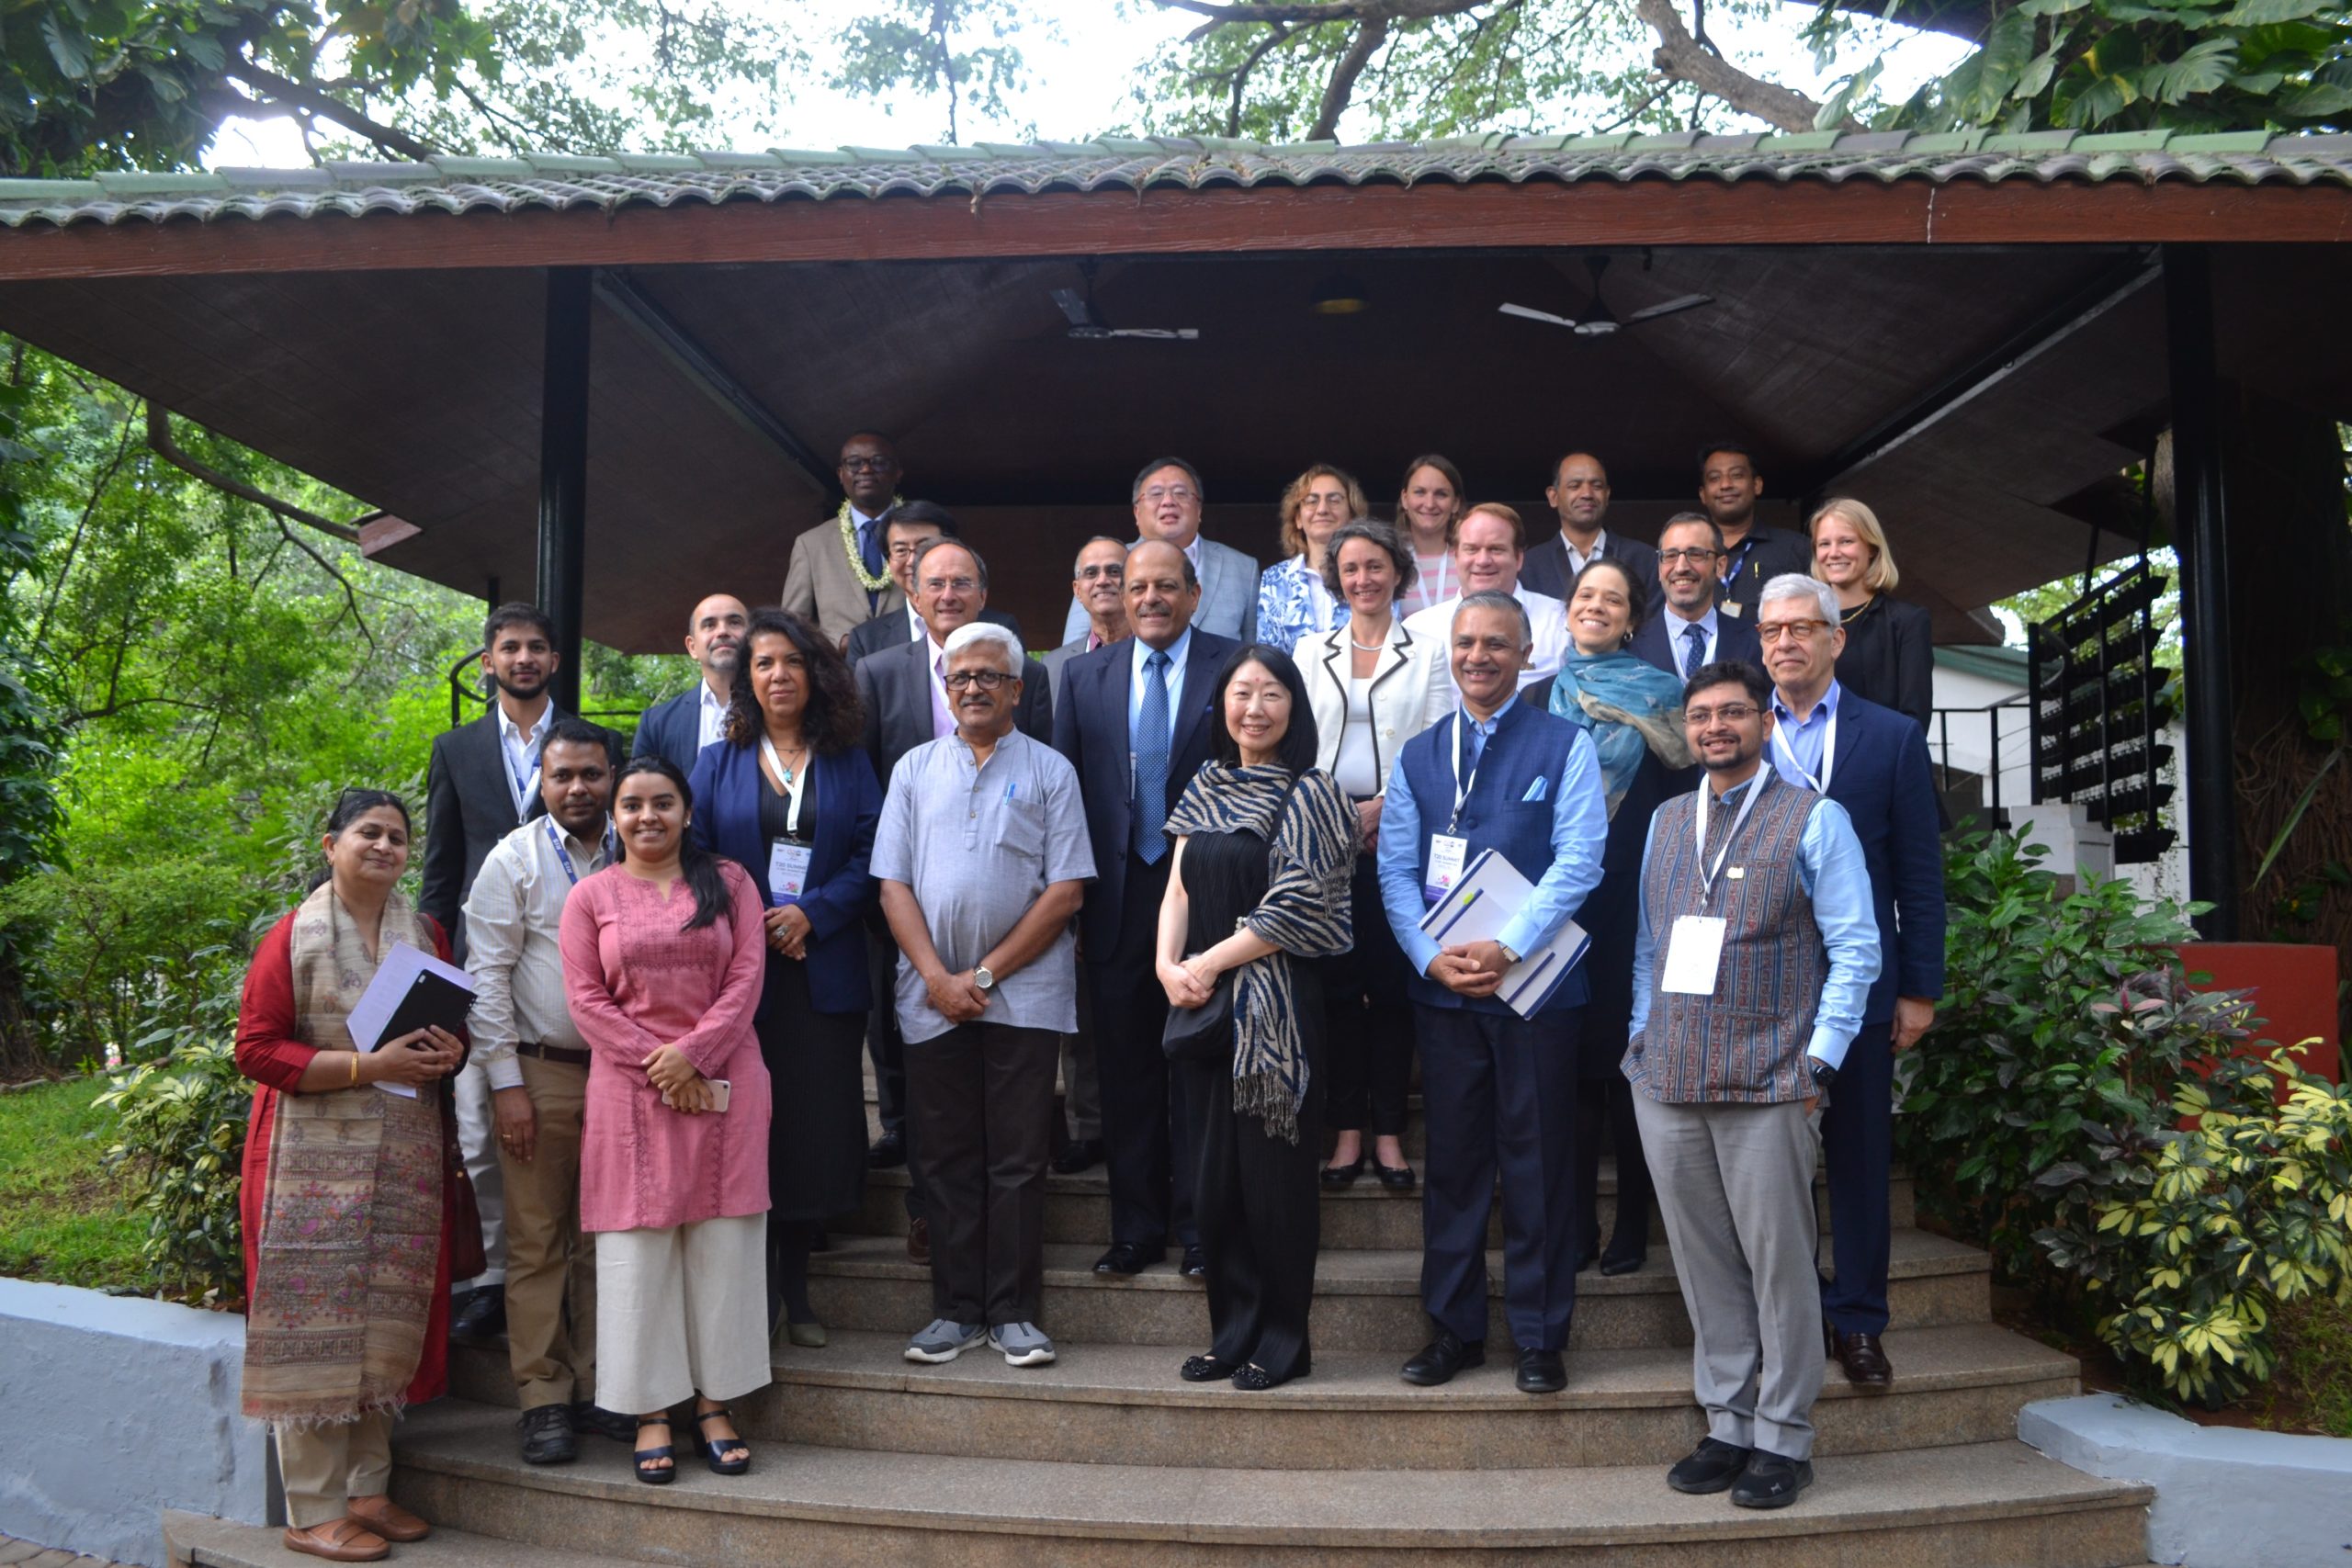 Photo: Participants of the T20 Conference Group Photo taken outside